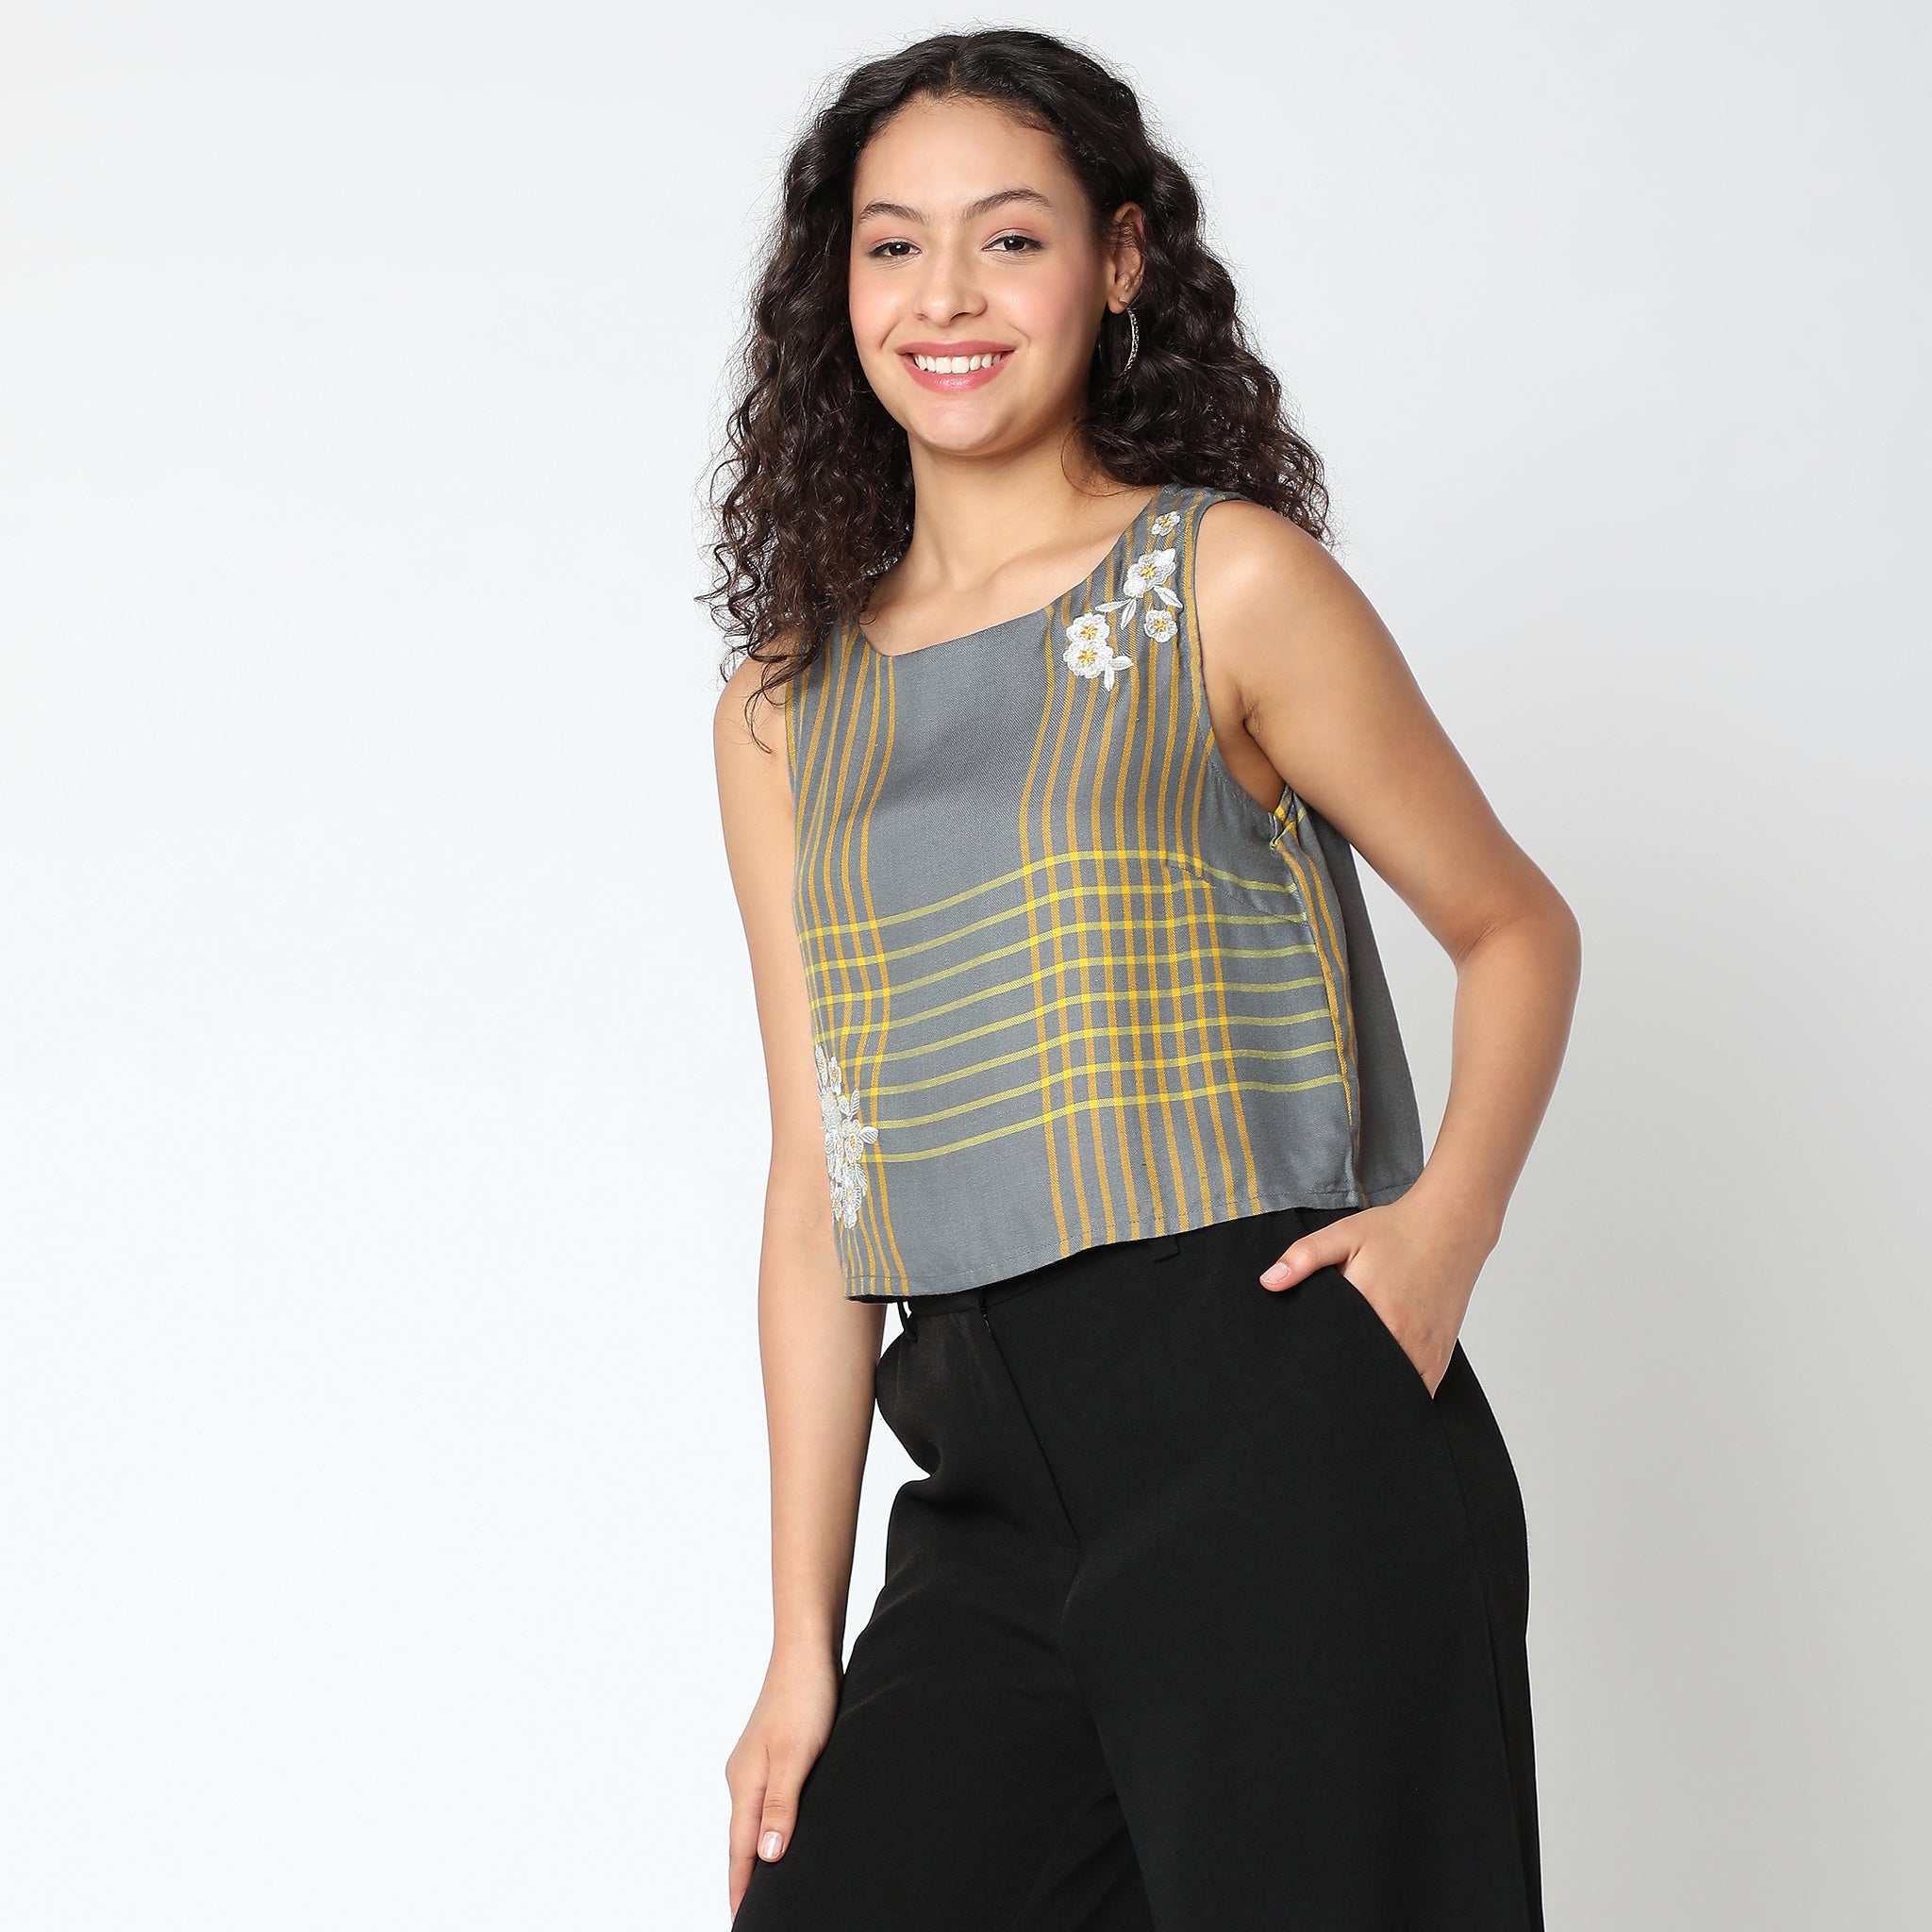 Women Wearing Boxy Fit Checkered Top